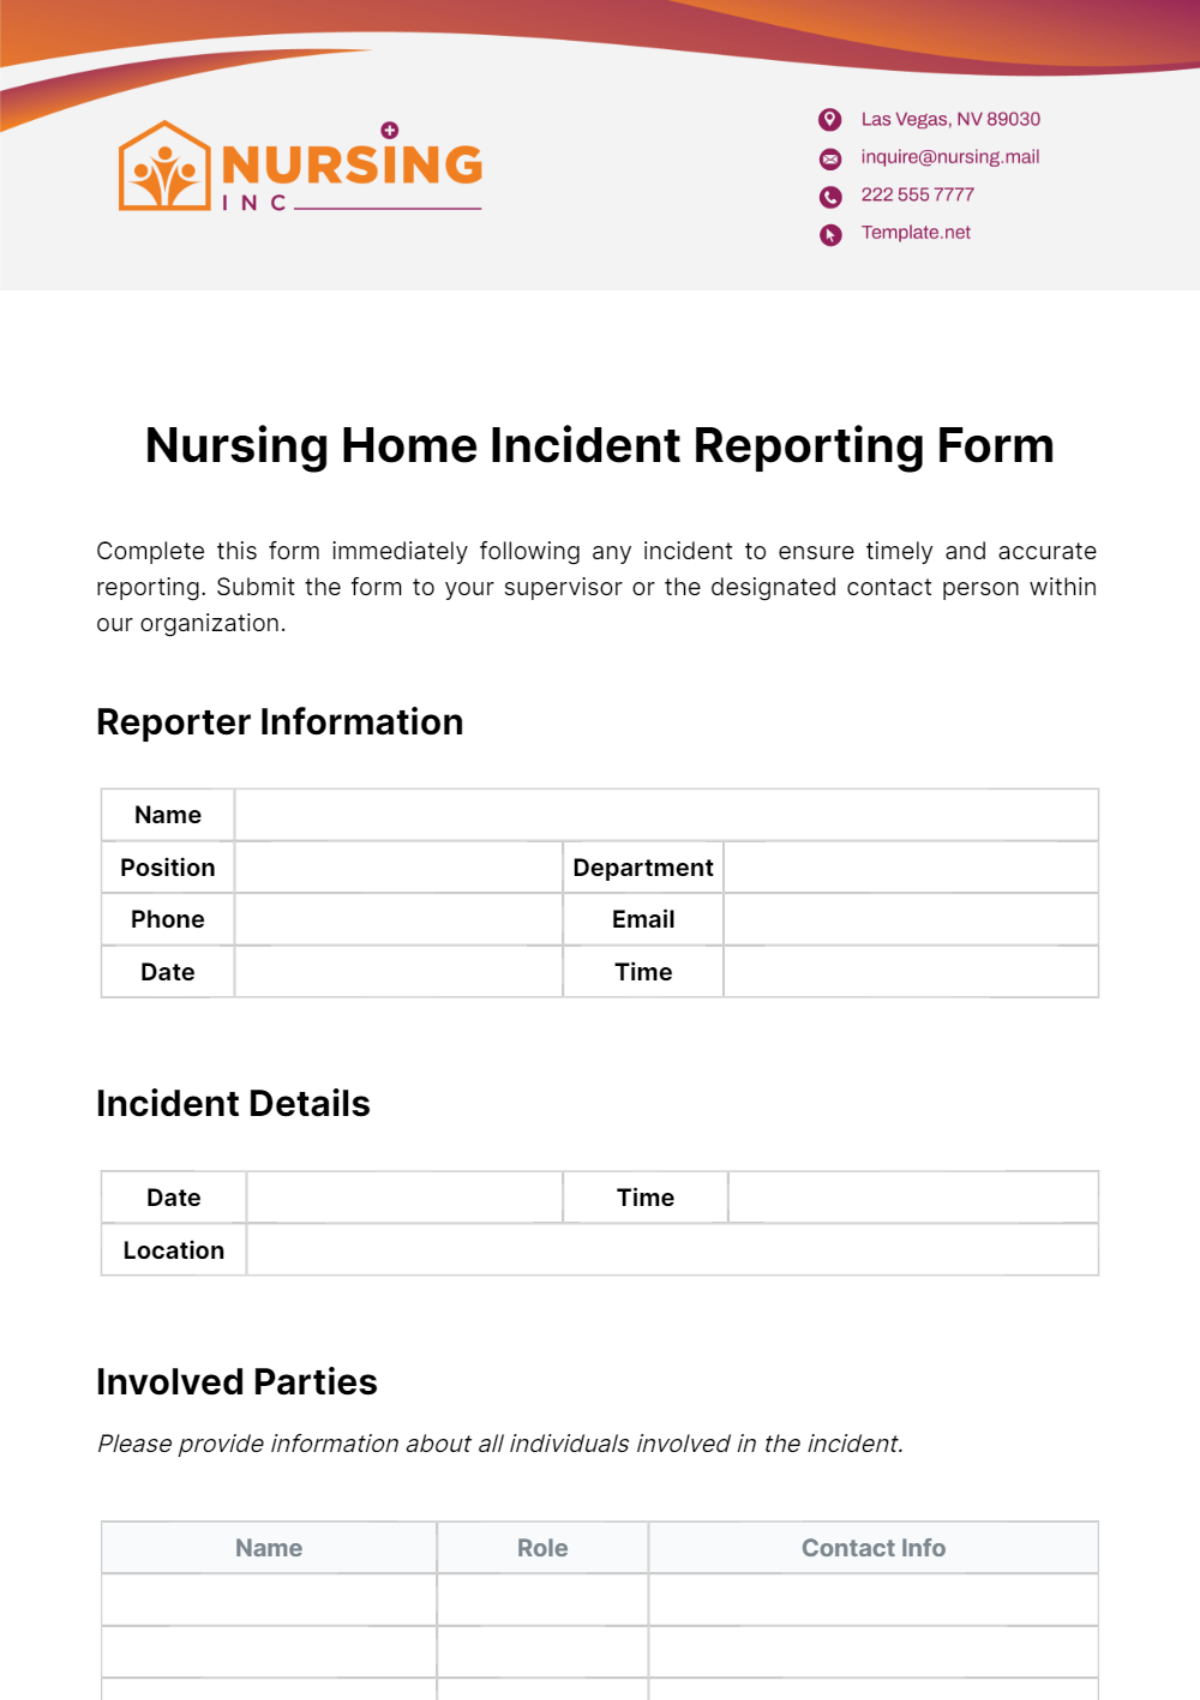 Nursing Home Incident Reporting Form Template